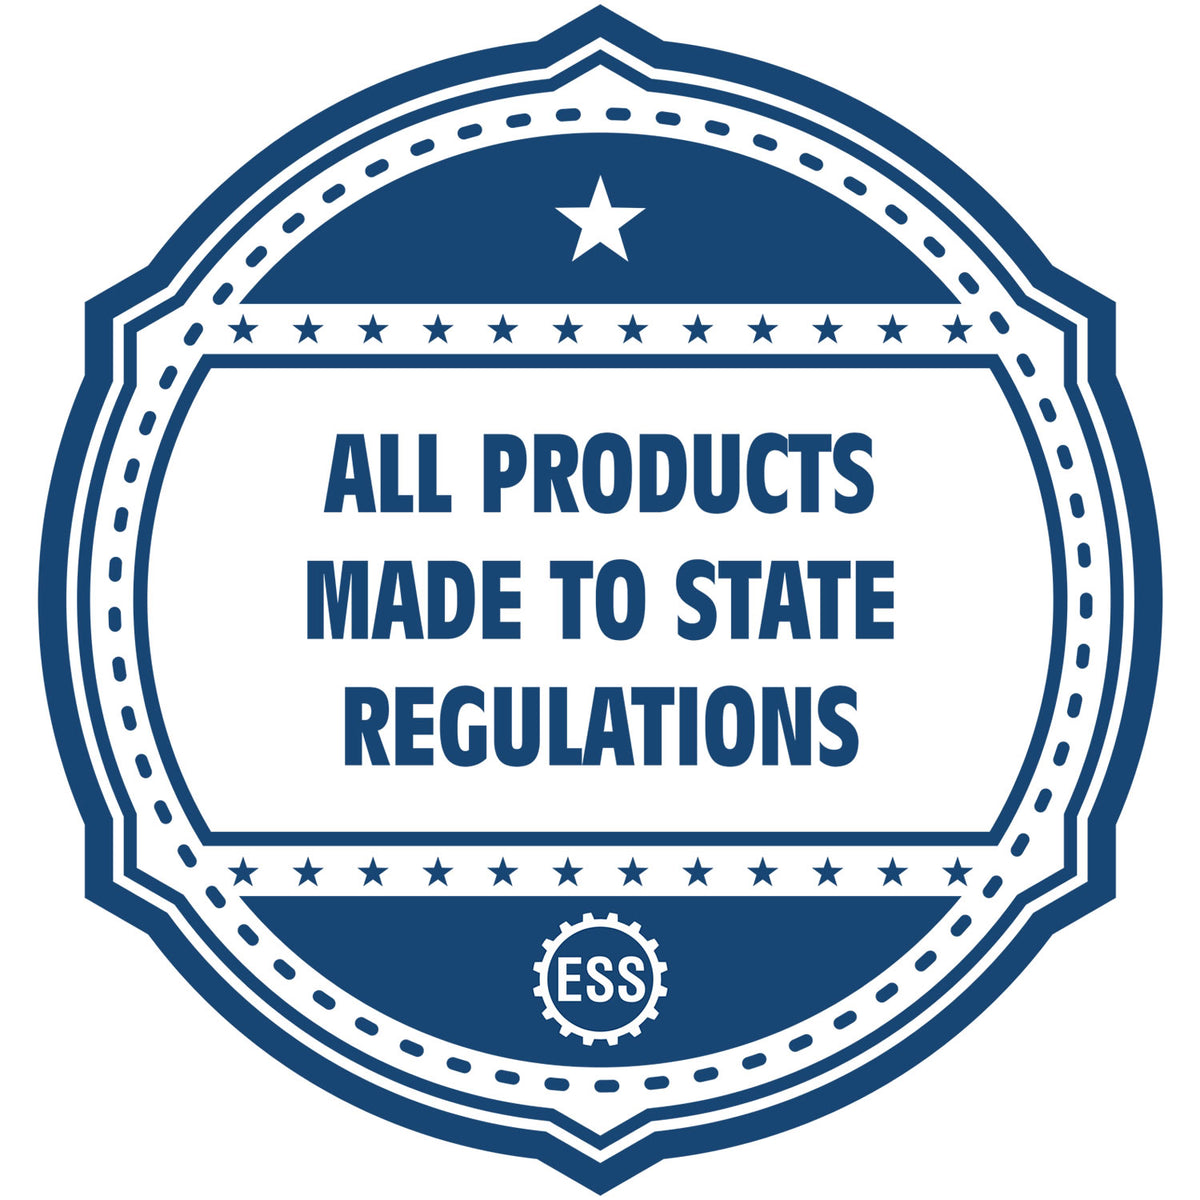 An icon or badge element for the Digital Oklahoma PE Stamp and Electronic Seal for Oklahoma Engineer showing that this product is made in compliance with state regulations.